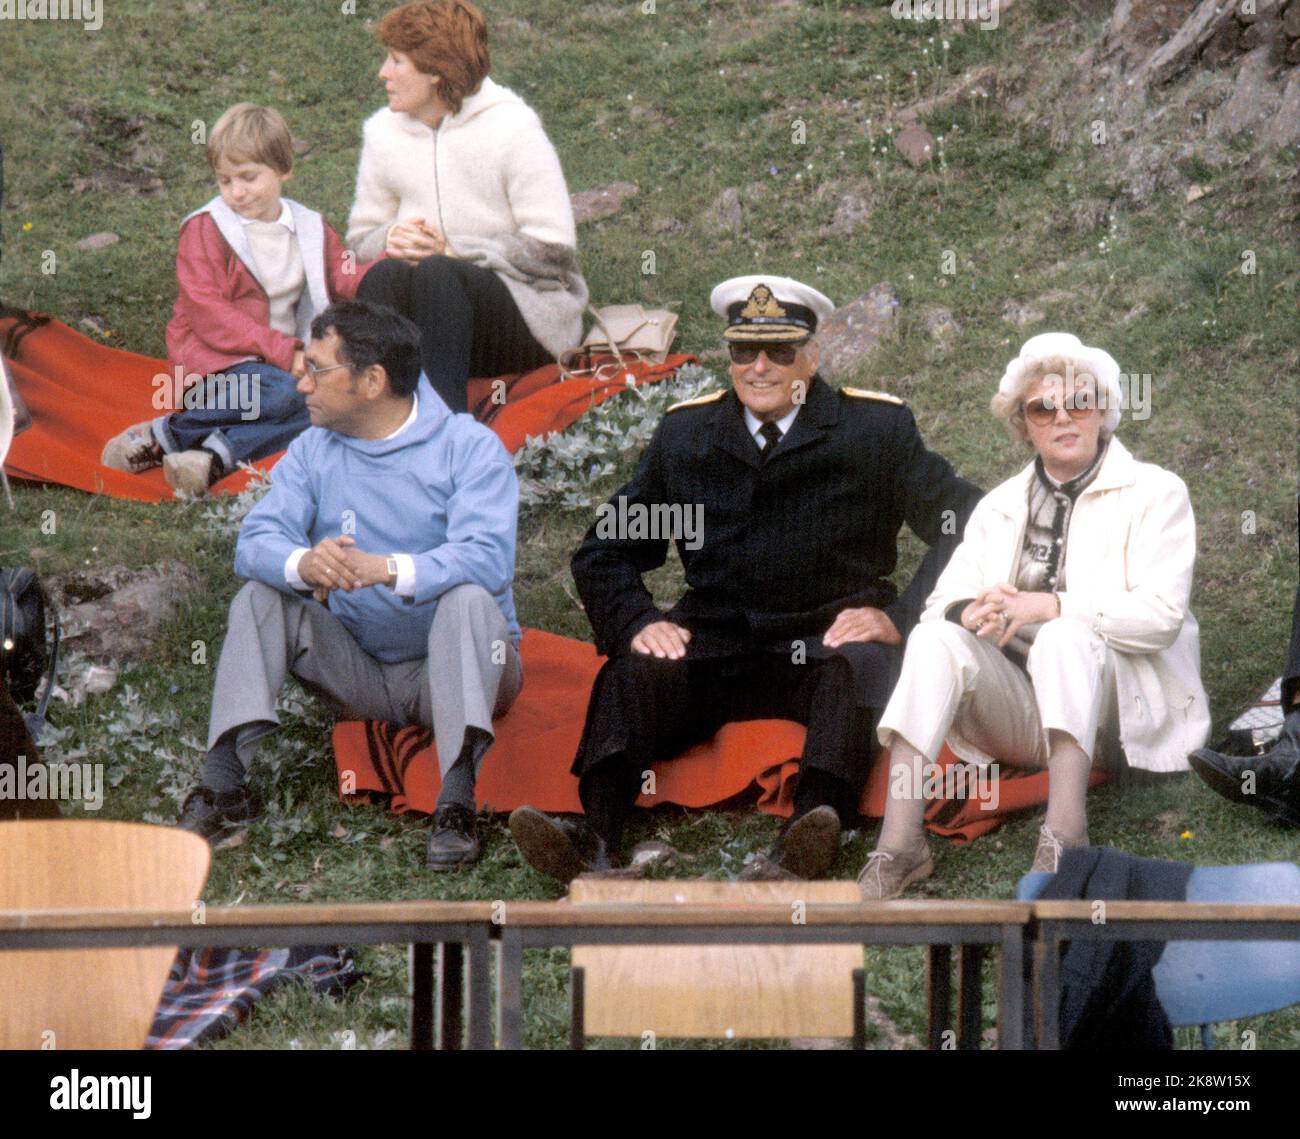 Greenland, Brattalid August 1982. King Olav and Crown Princess Sonja visit Greenland with Queen Margrethe, Prince Henrik, the children Crown Prince Frederik, Prince Joachim of Denmark and President Vigdis Finnbogadottir. Here the royal lunch eat in nature. King Olav (middle) together with Vigdis Finnbogadottir. Photo: Paul Owesen NTB / NTB Stock Photo